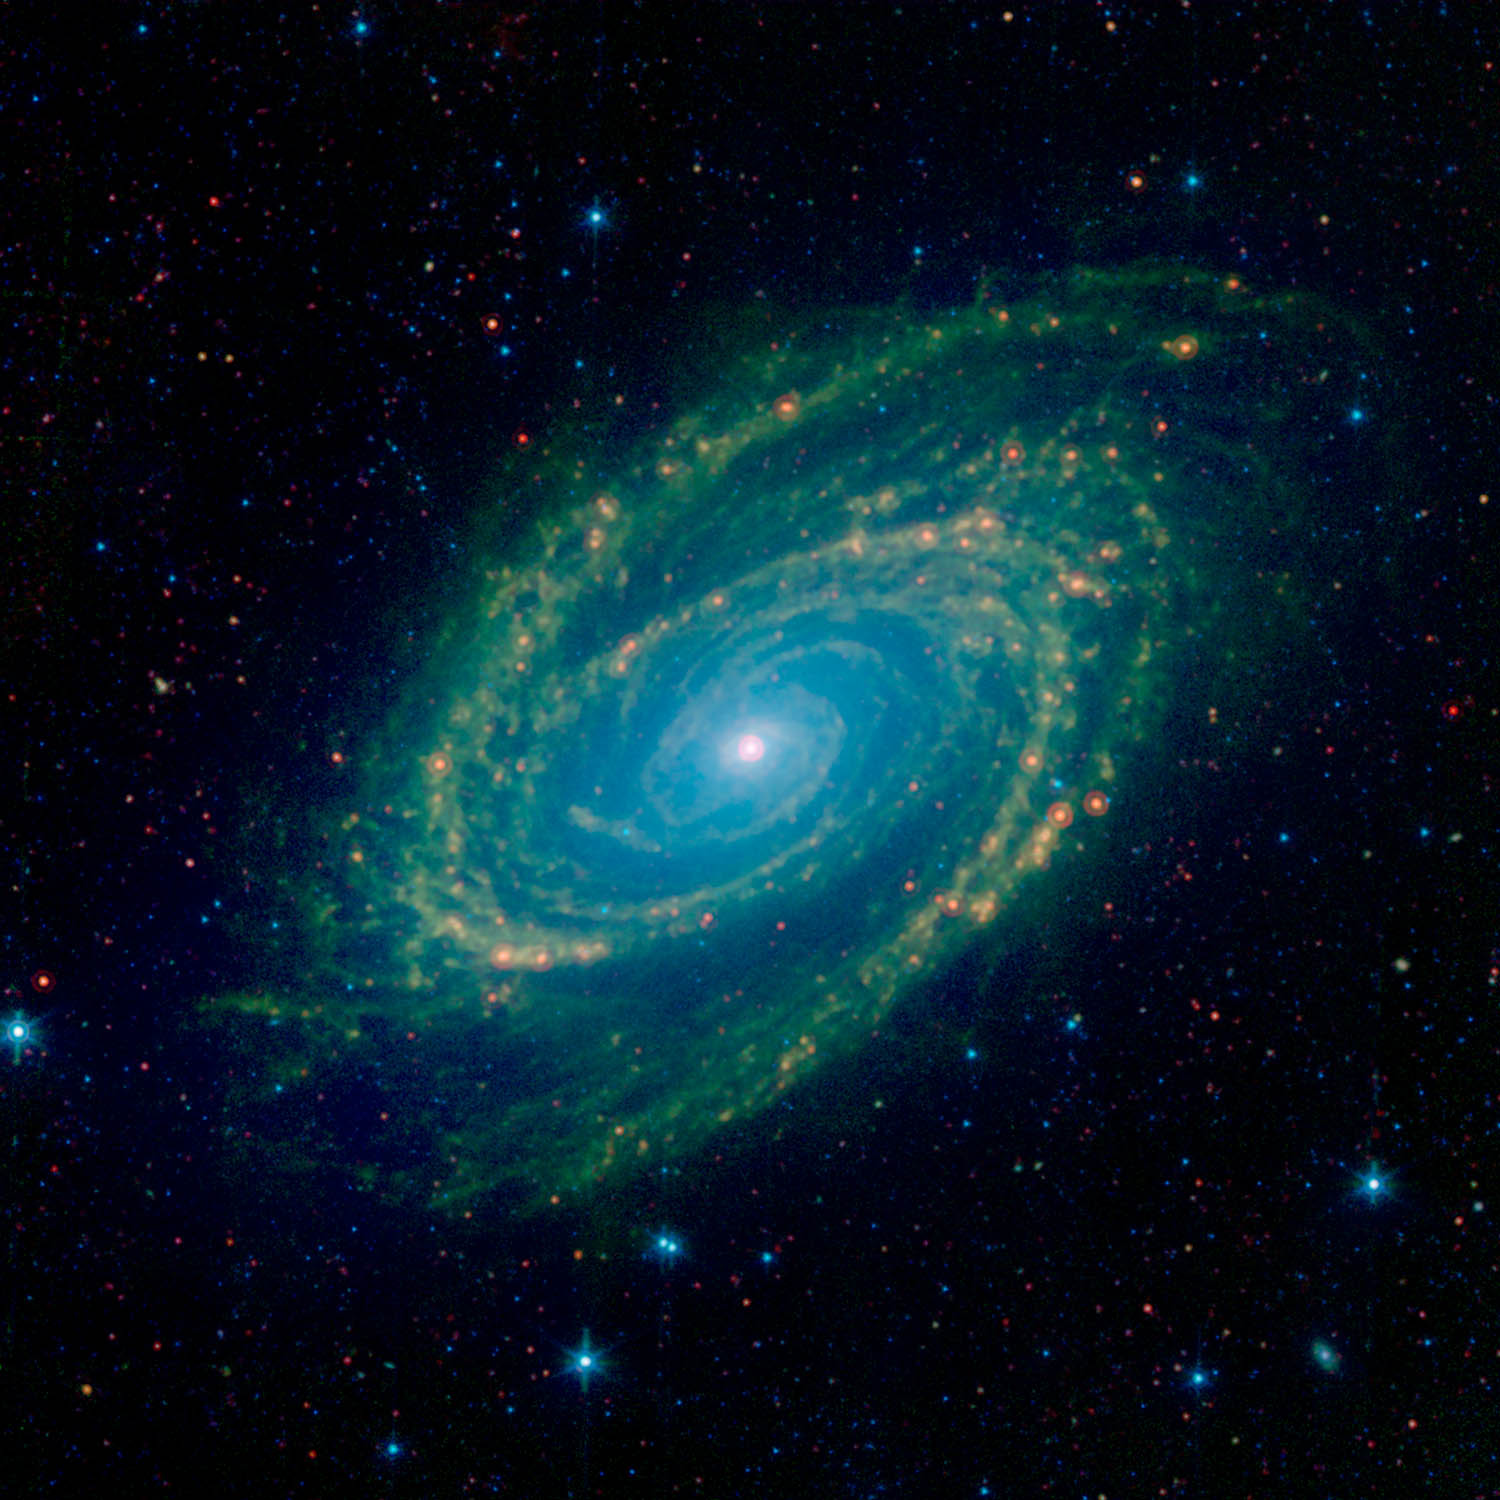 M81 is a grand spiral galaxy, and in this image its arms appear as green vines twisting inward toward a central bright spot. Embedded in those arms are spots of yellow and orange light. All of this is on a background dotted with red and blue pinpricks of light.